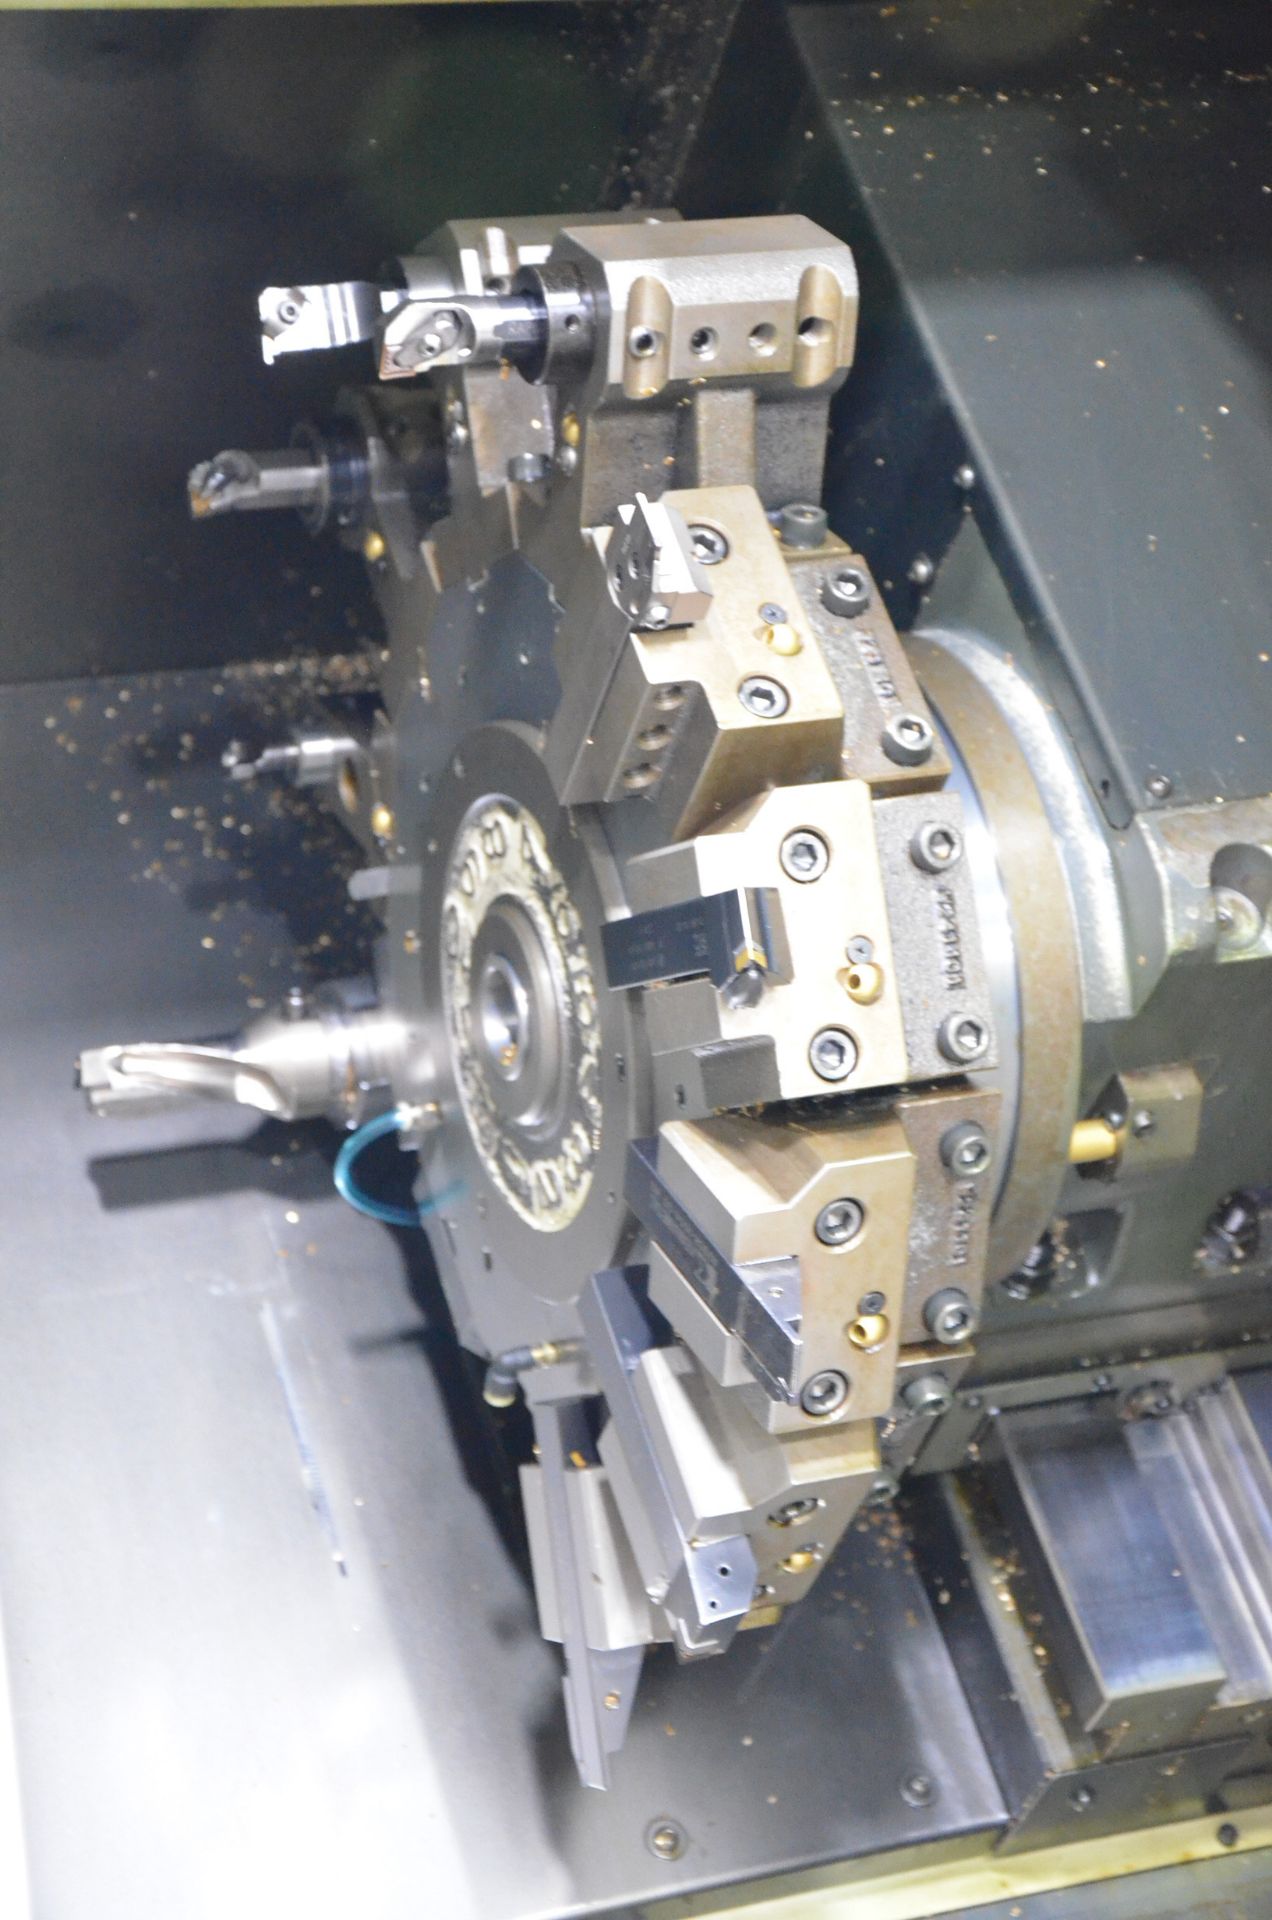 NAKAMURA-TOME SC300 CNC TURNING AND LIVE MILLING CENTER WITH FANUC 21I-TB CNC CONTROL, 22.04" SWING, - Image 13 of 16